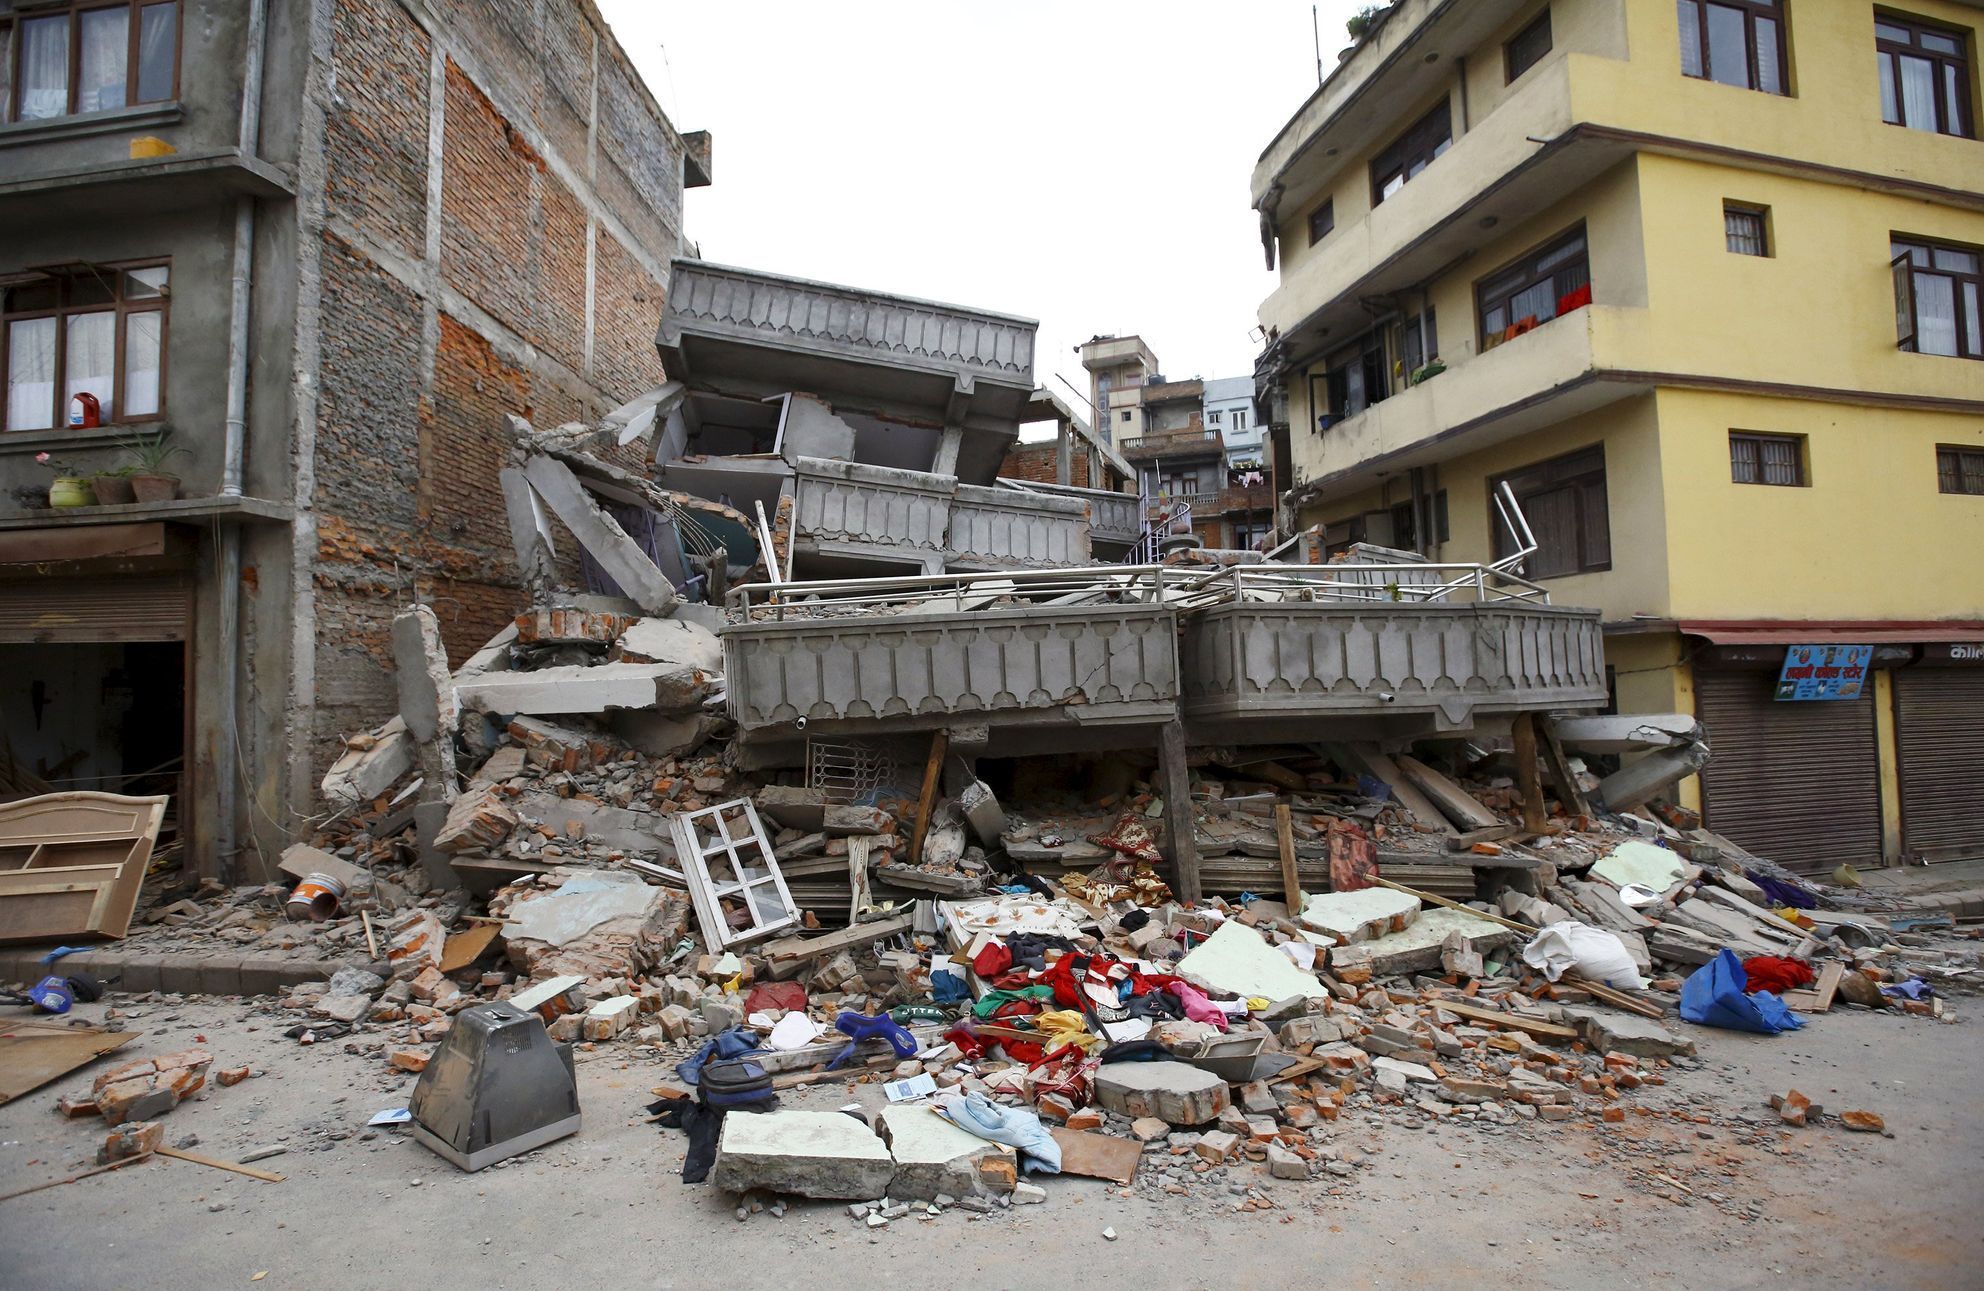 Collapsed building is pictured after an earthquake hit, in Kathmandu